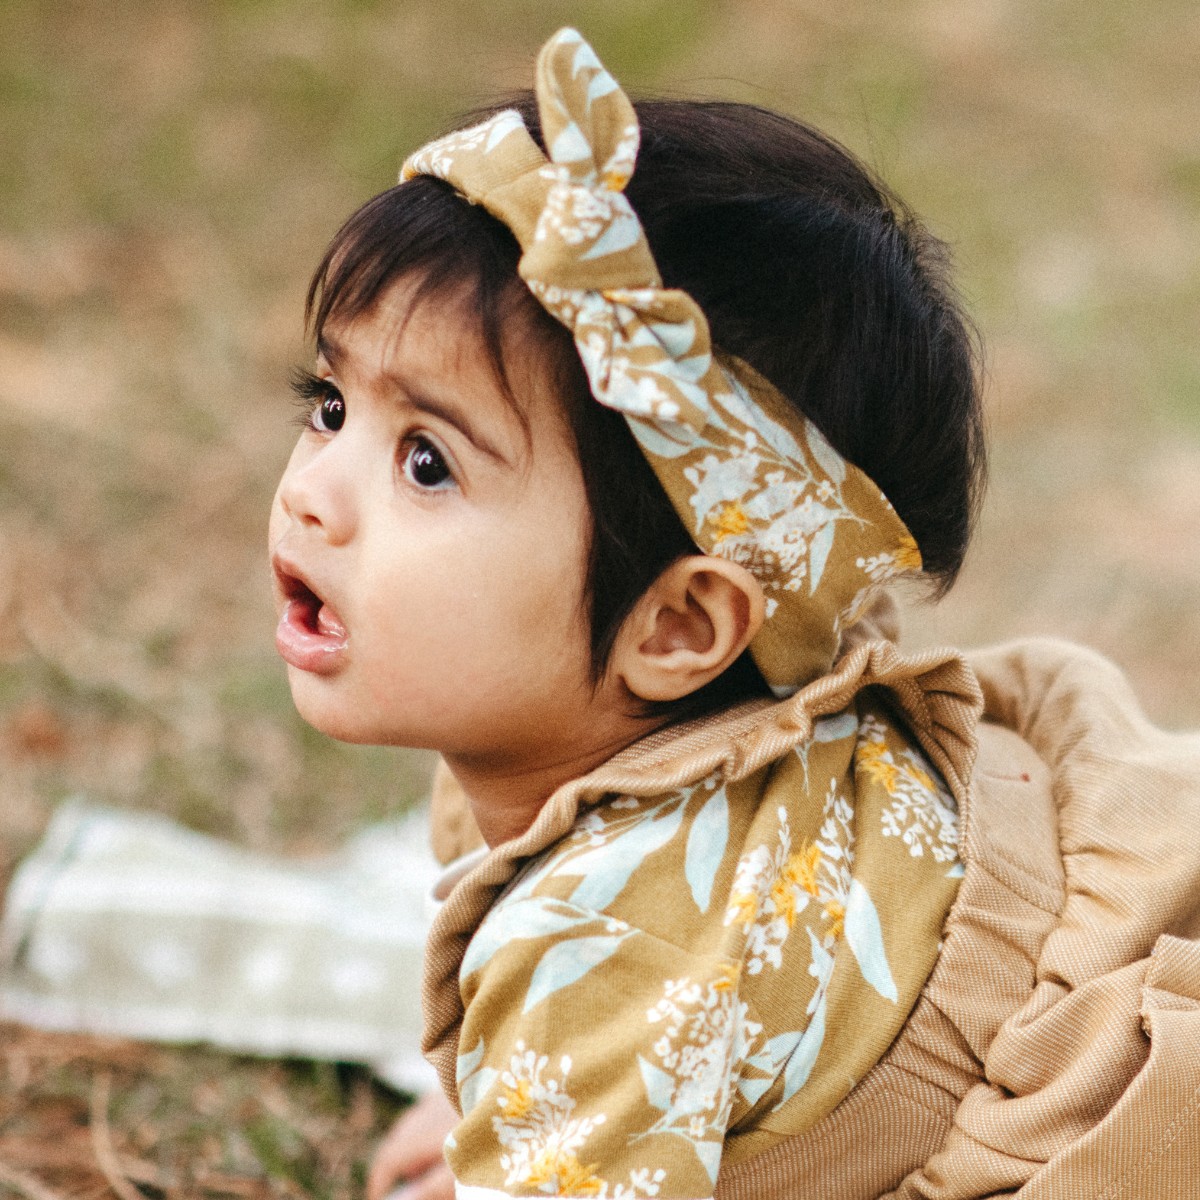 Baby girl crawling on a picnic blanket wearing the Gold Floral organic cotton Knotted Headband by Milkbarn